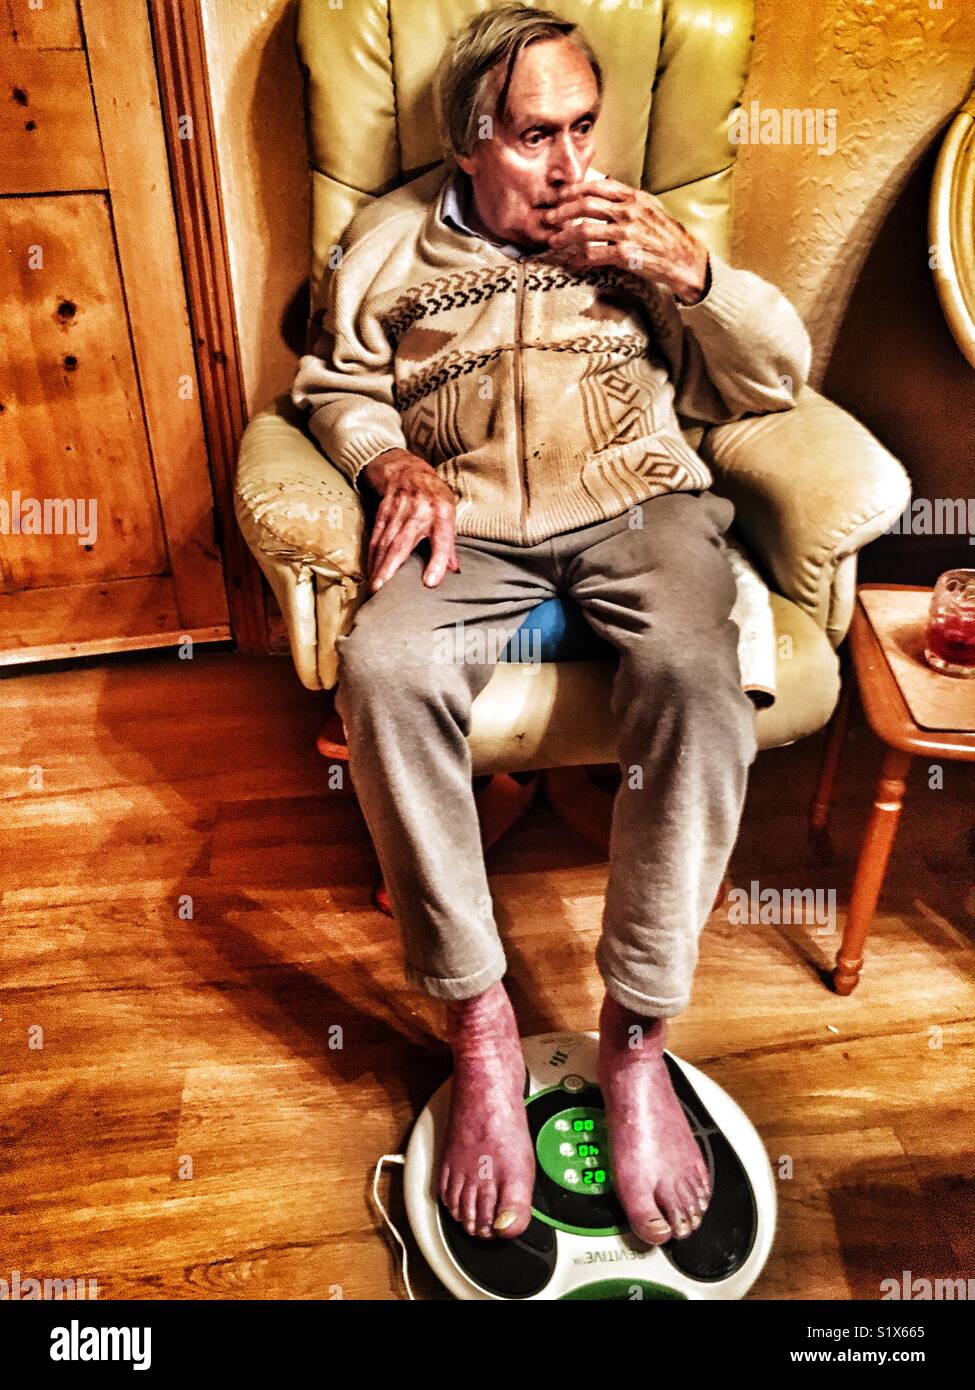 Elderly man with poor circulation having an electronic foot massage Stock Photo